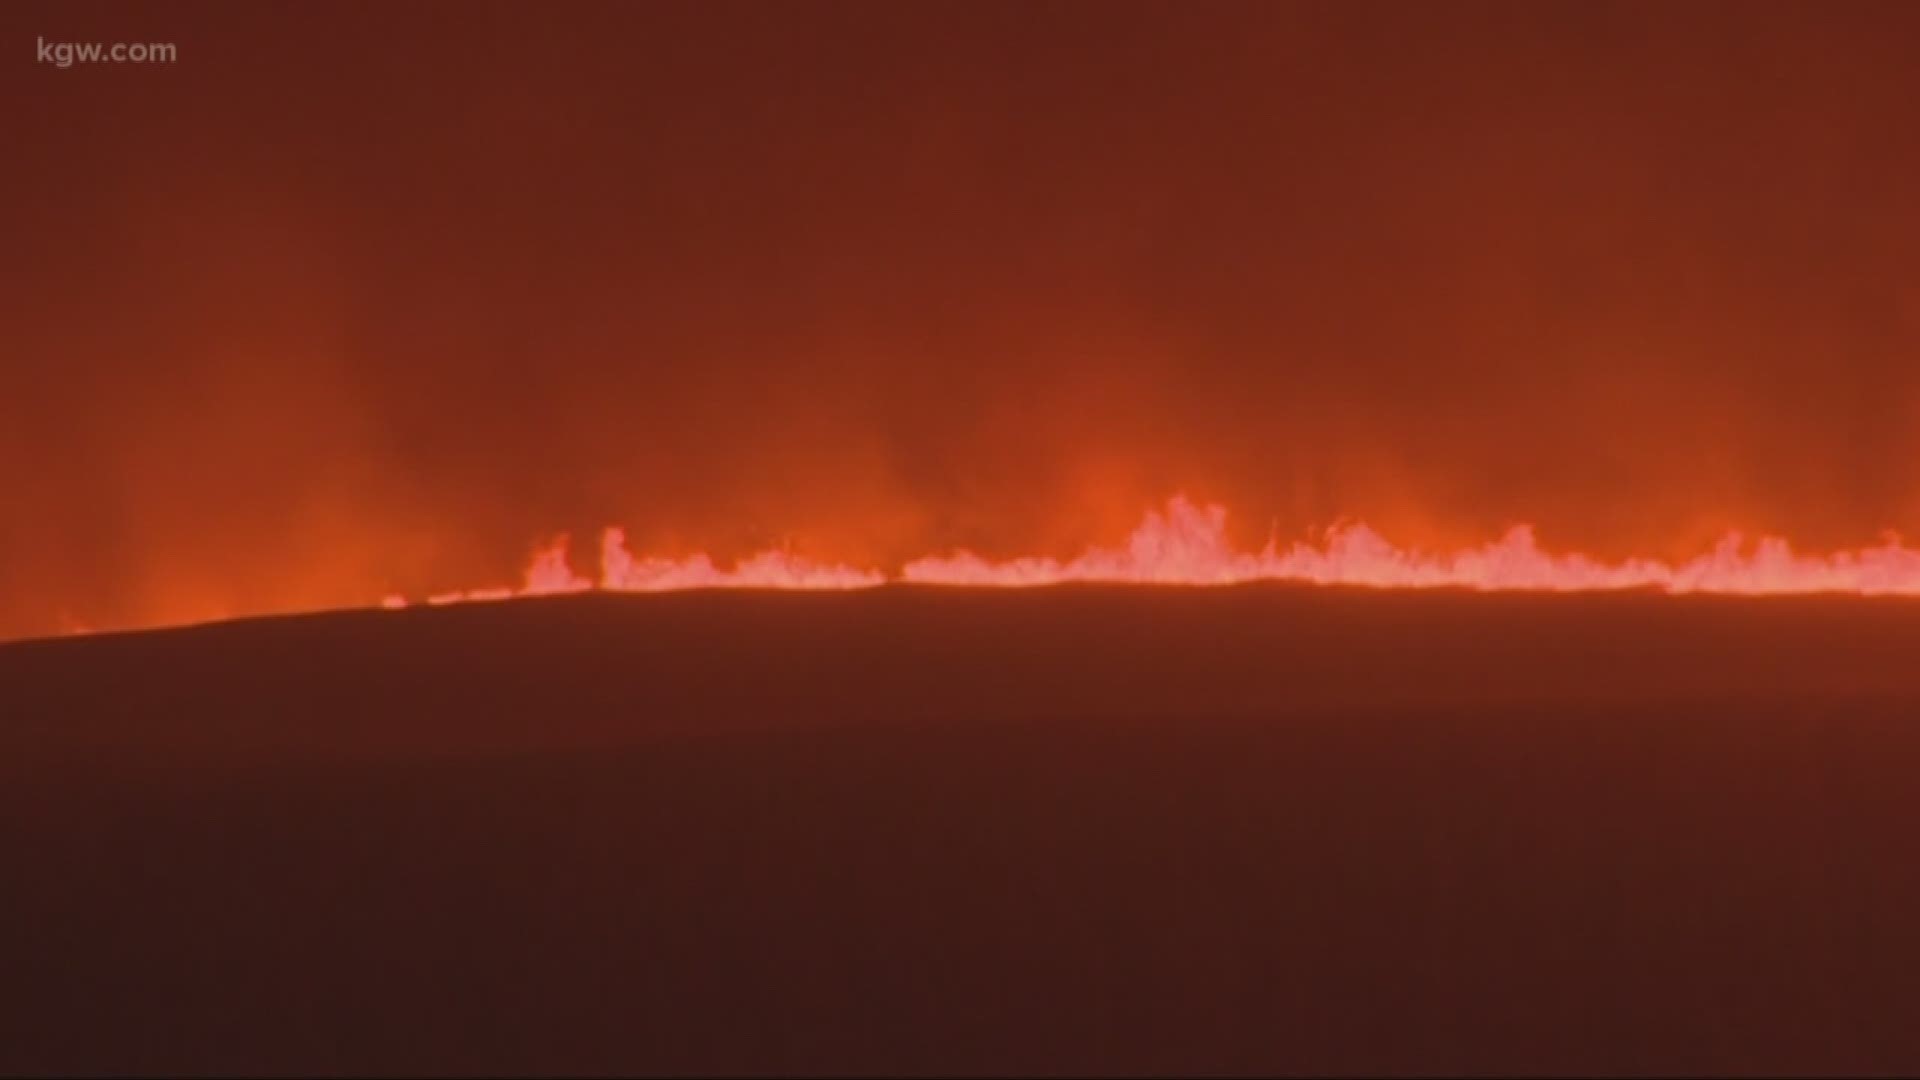 Gorge wildfire flares up